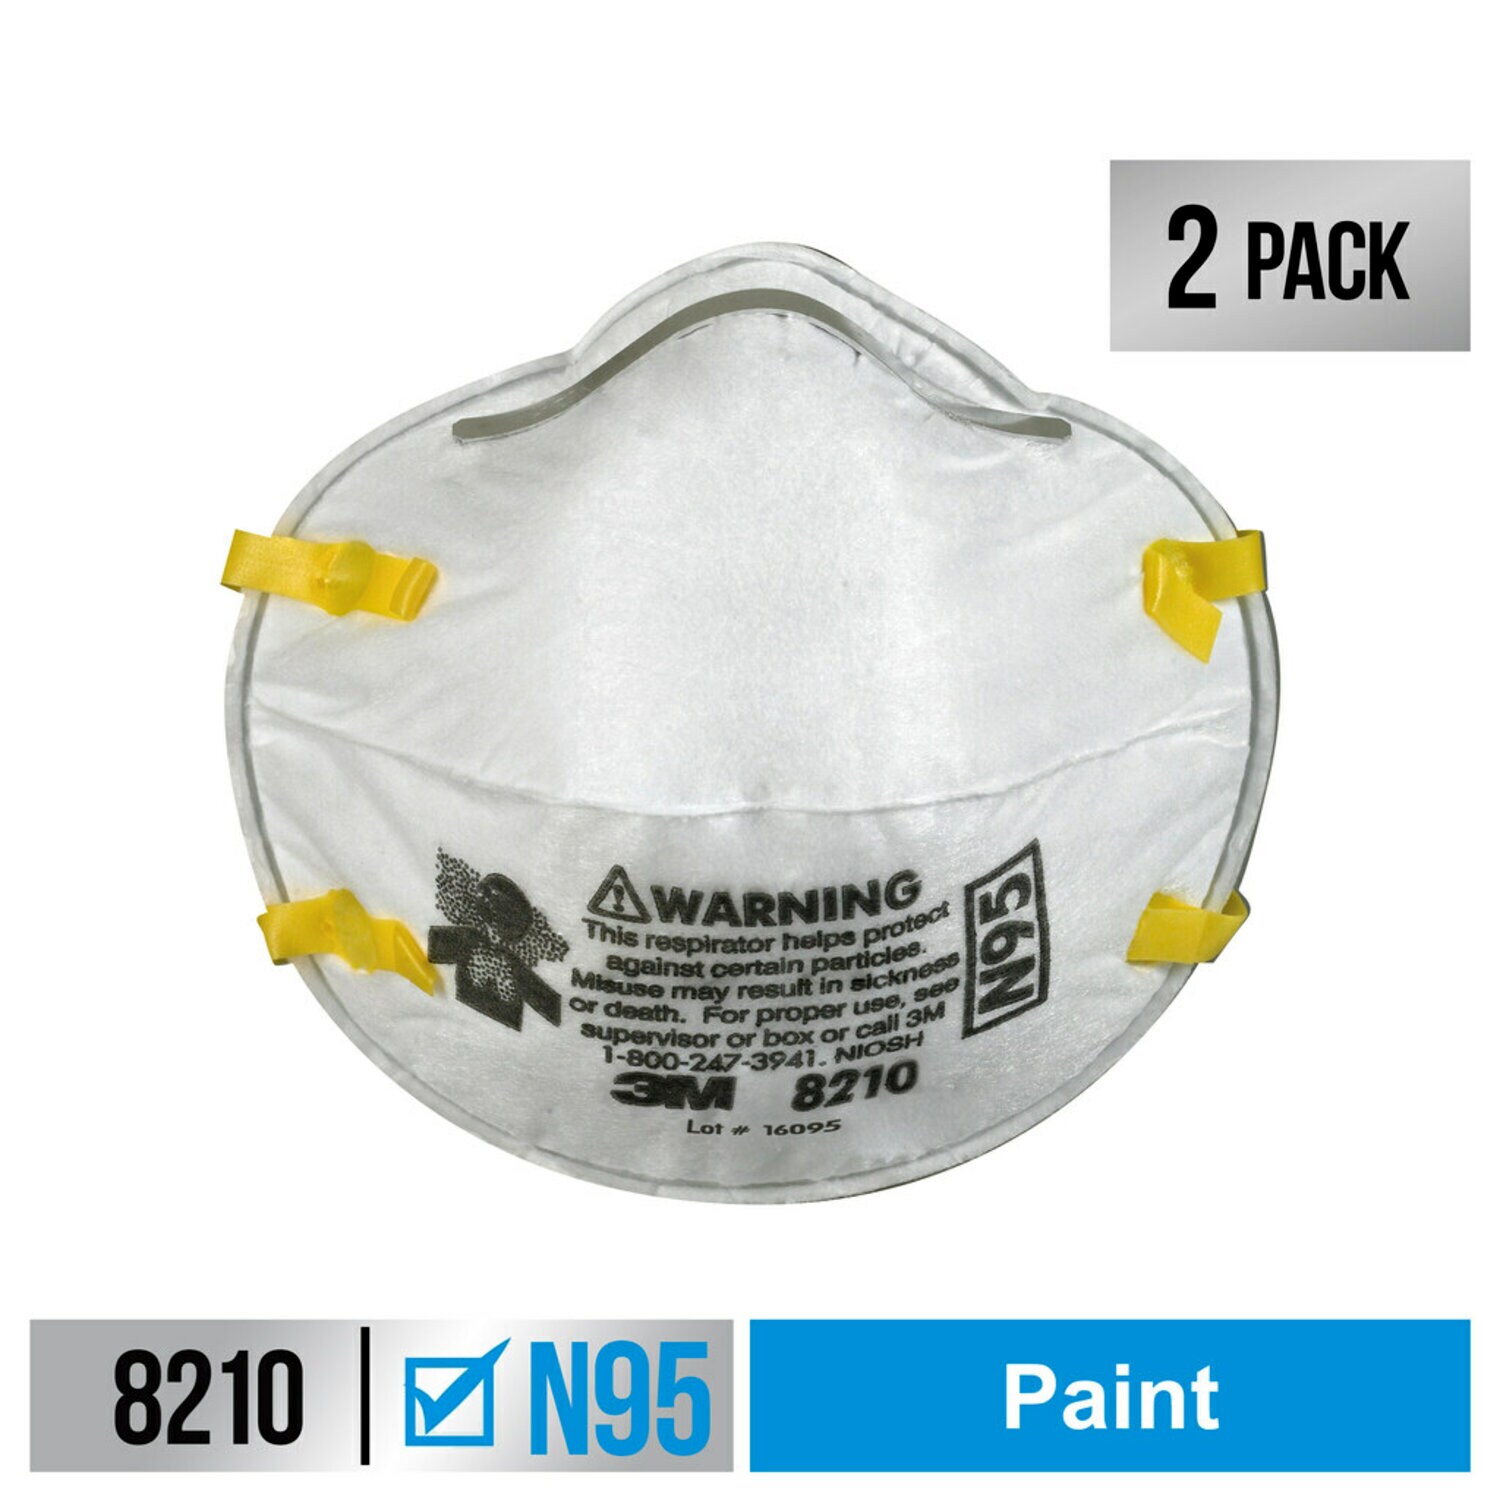 7100158825 - 3M Performance Paint Prep Respirator N95 Particulate 8210P2-C, 2
eaches/pack, 6 packs/case